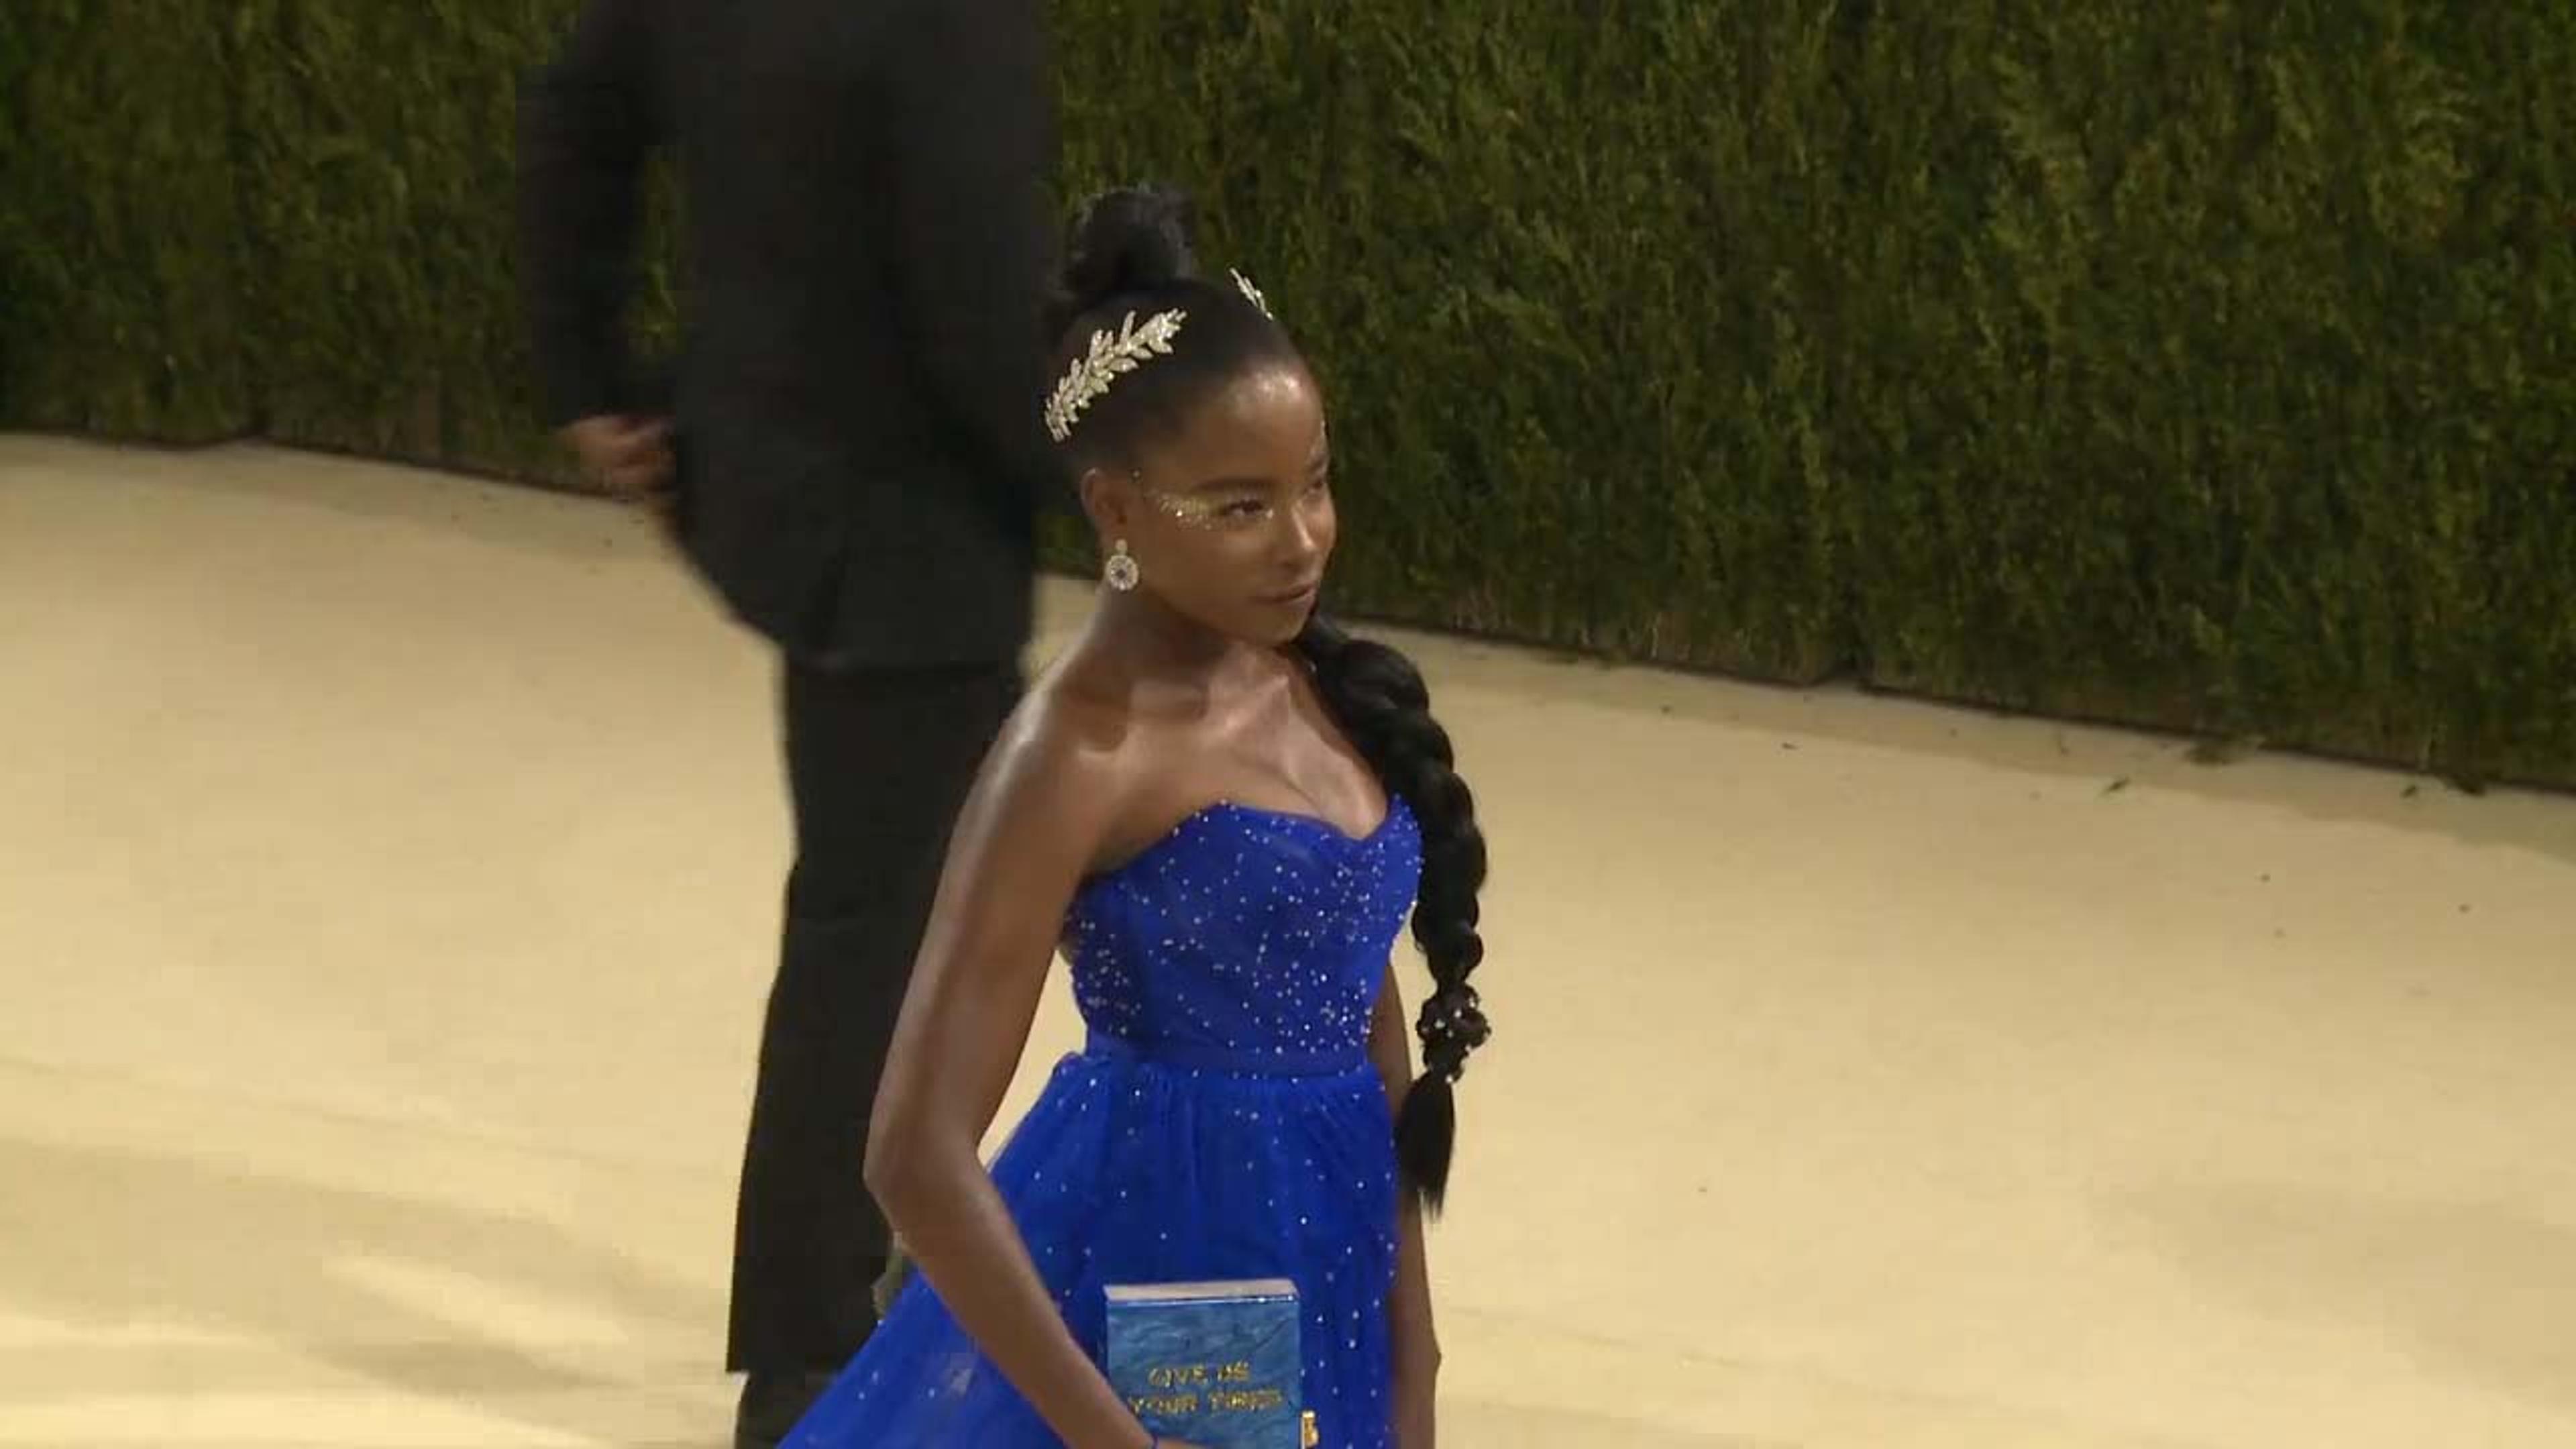 Amanda Gorman arriving on the 2021 Met Gala red carpet in a blue dress and gold leaf crown.